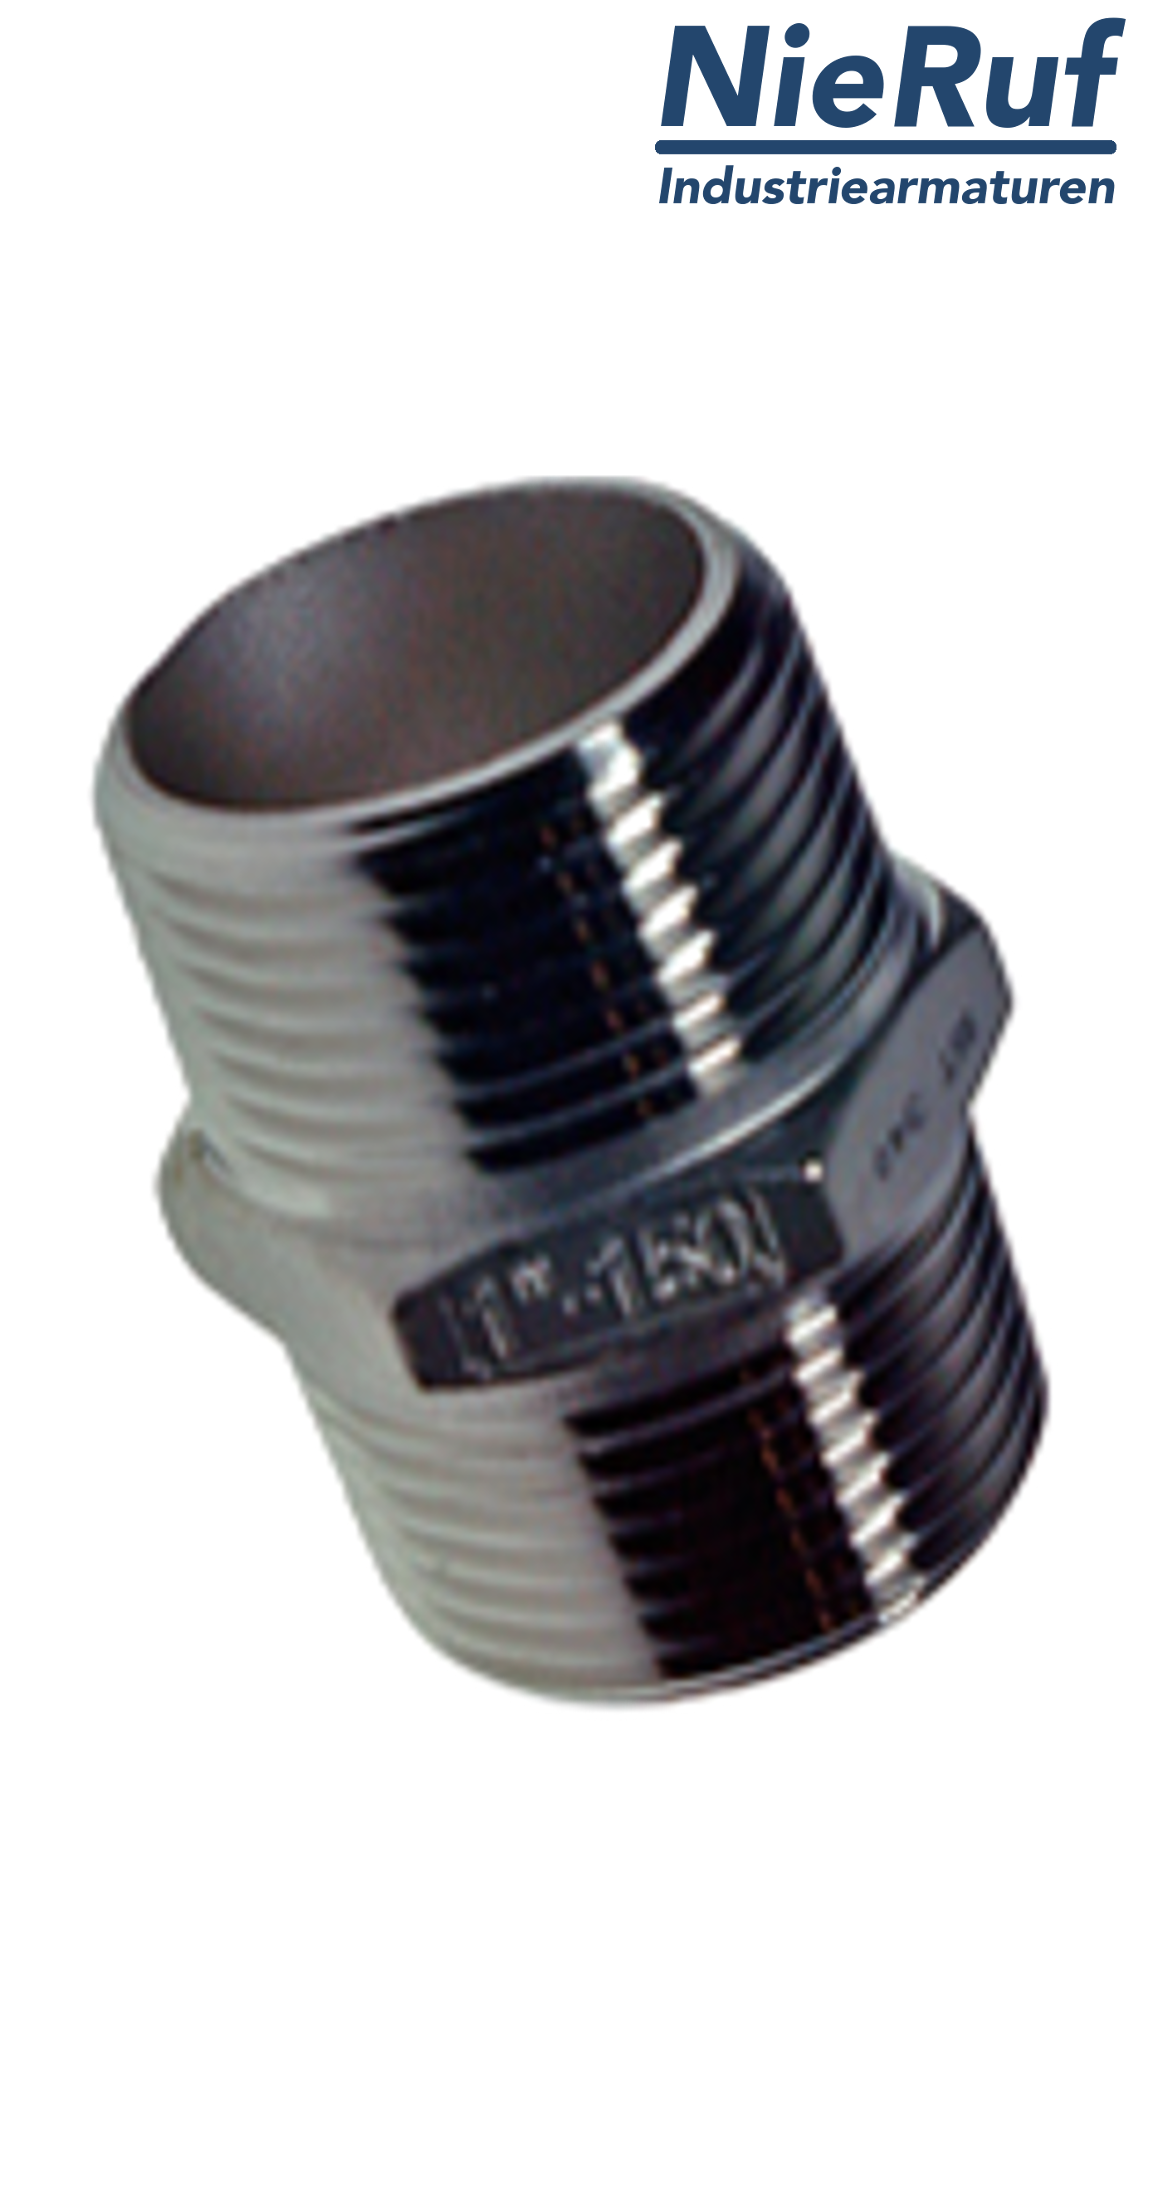 double nipple 1/2" inch NPT male stainless steel 316